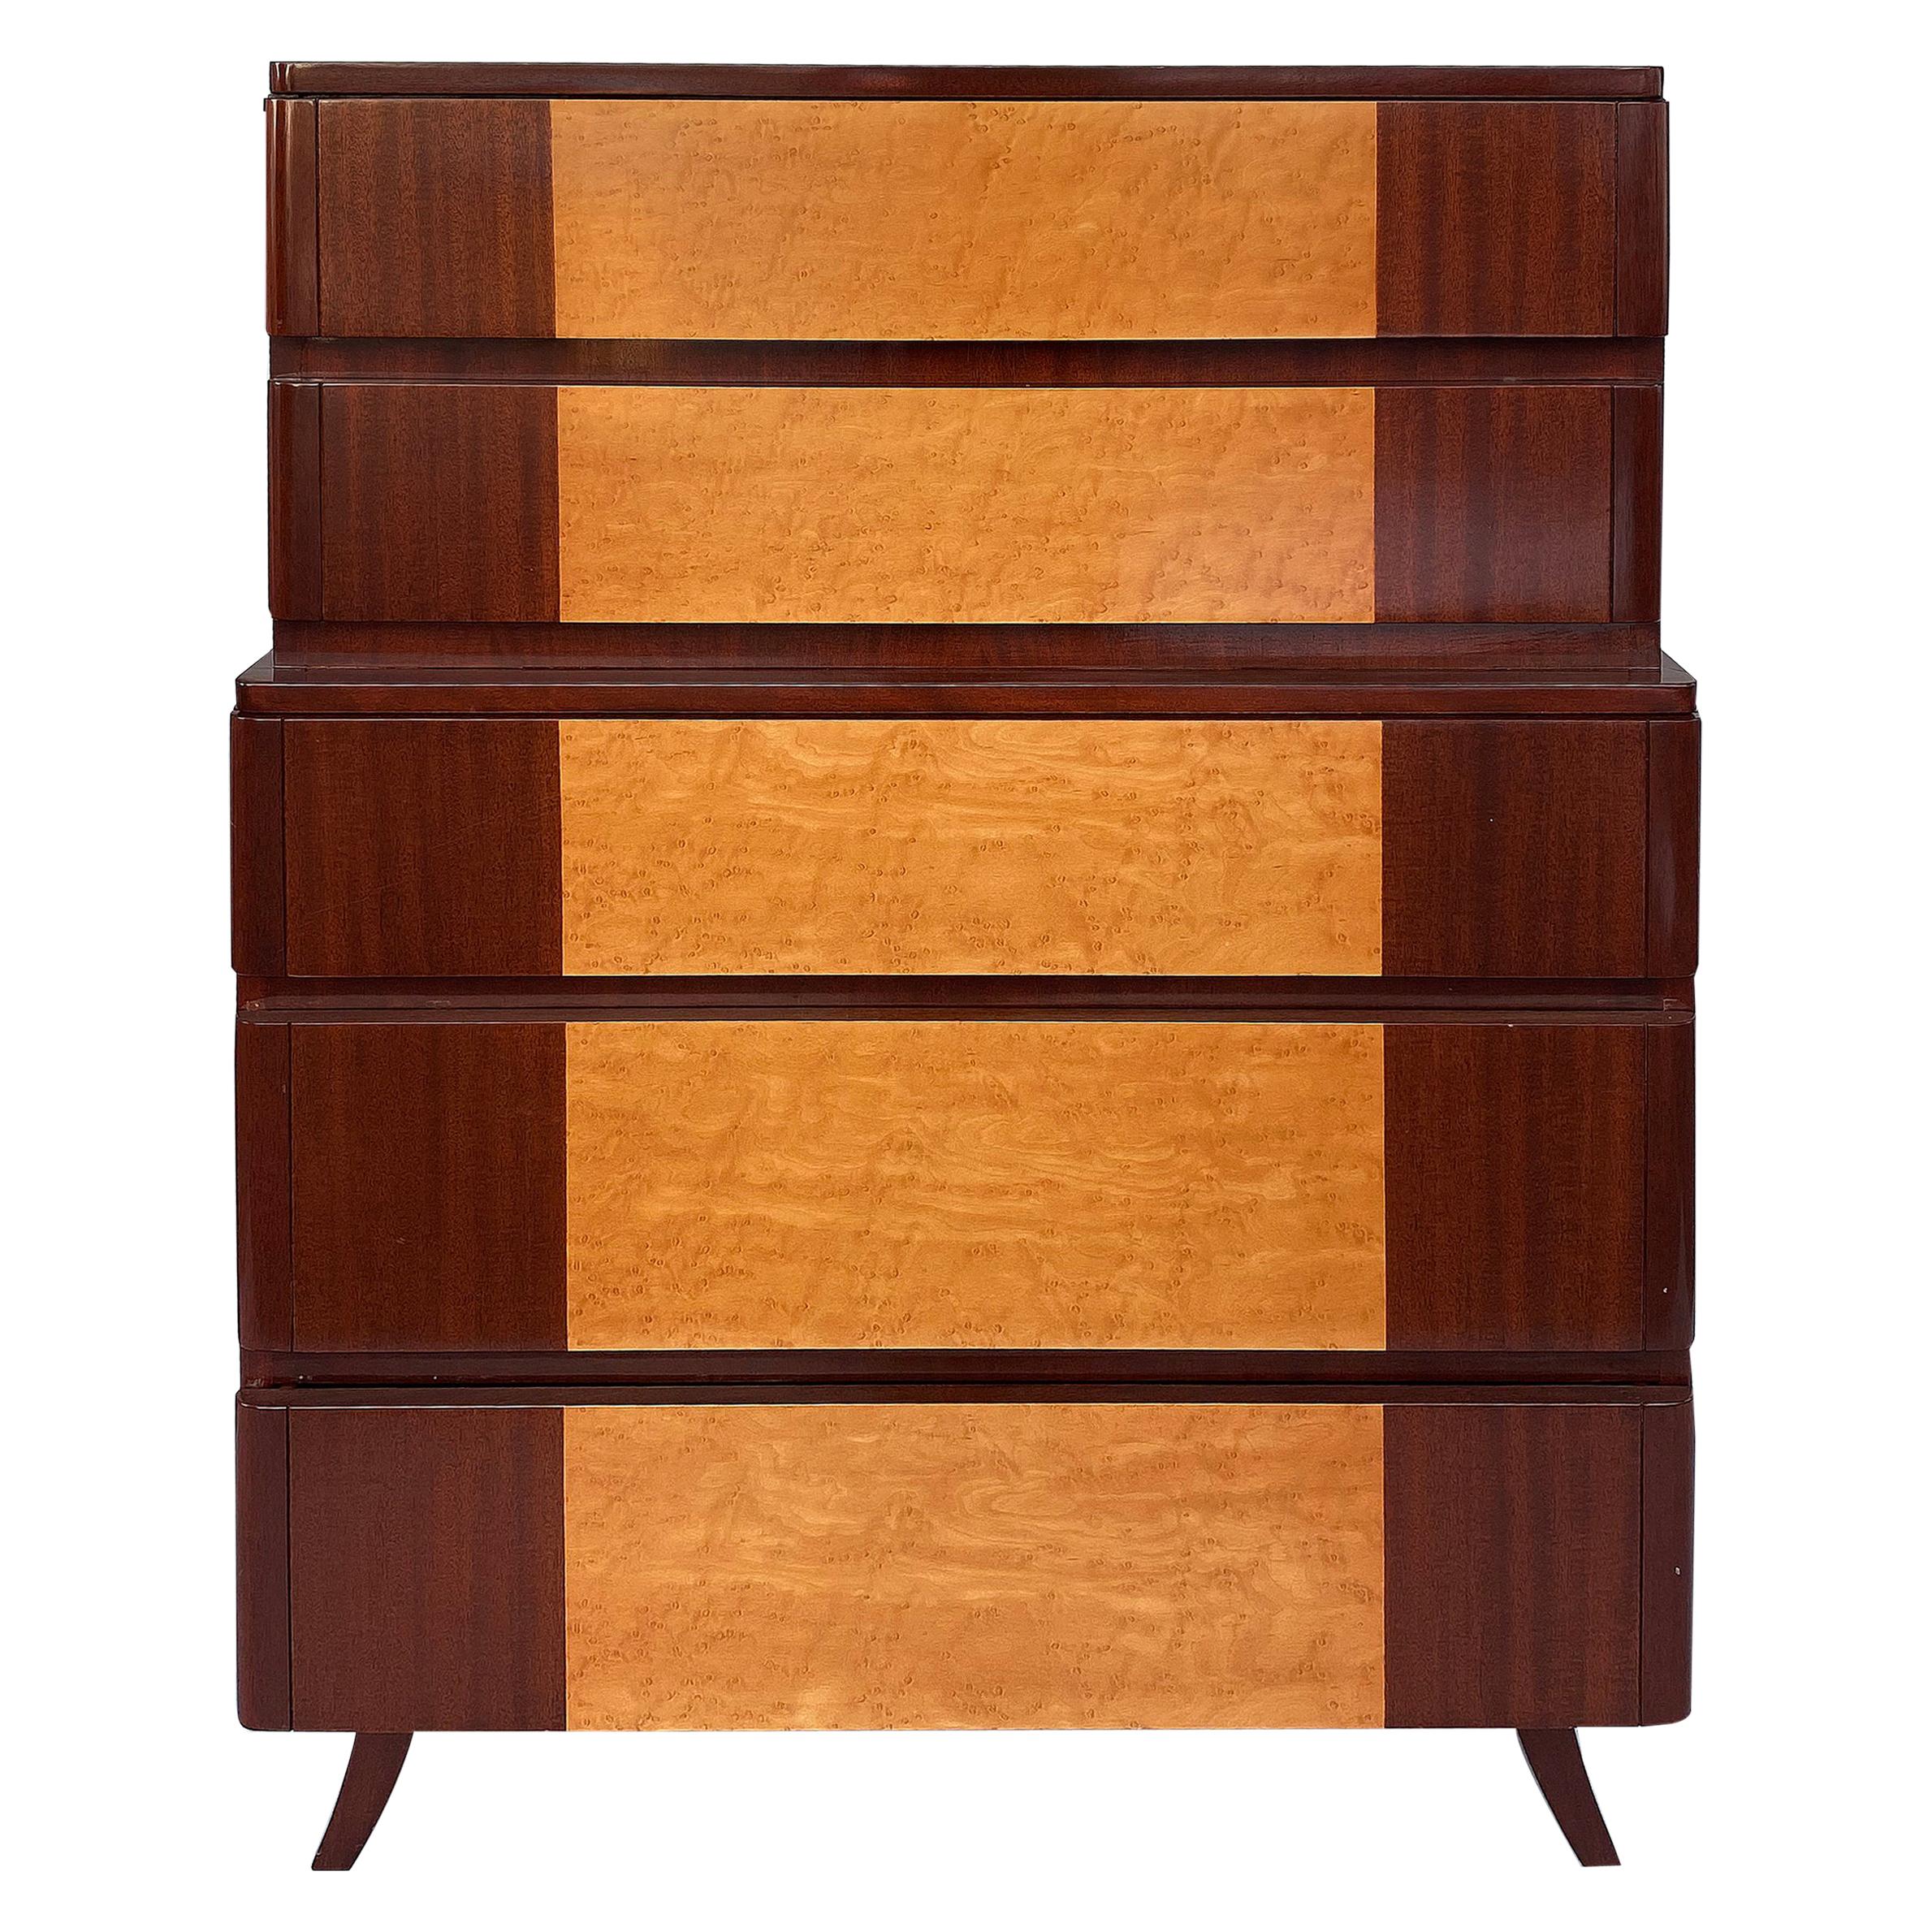 American Mid-Century Modern Tall Chest of Drawers by RWAY Furniture Co. c1965